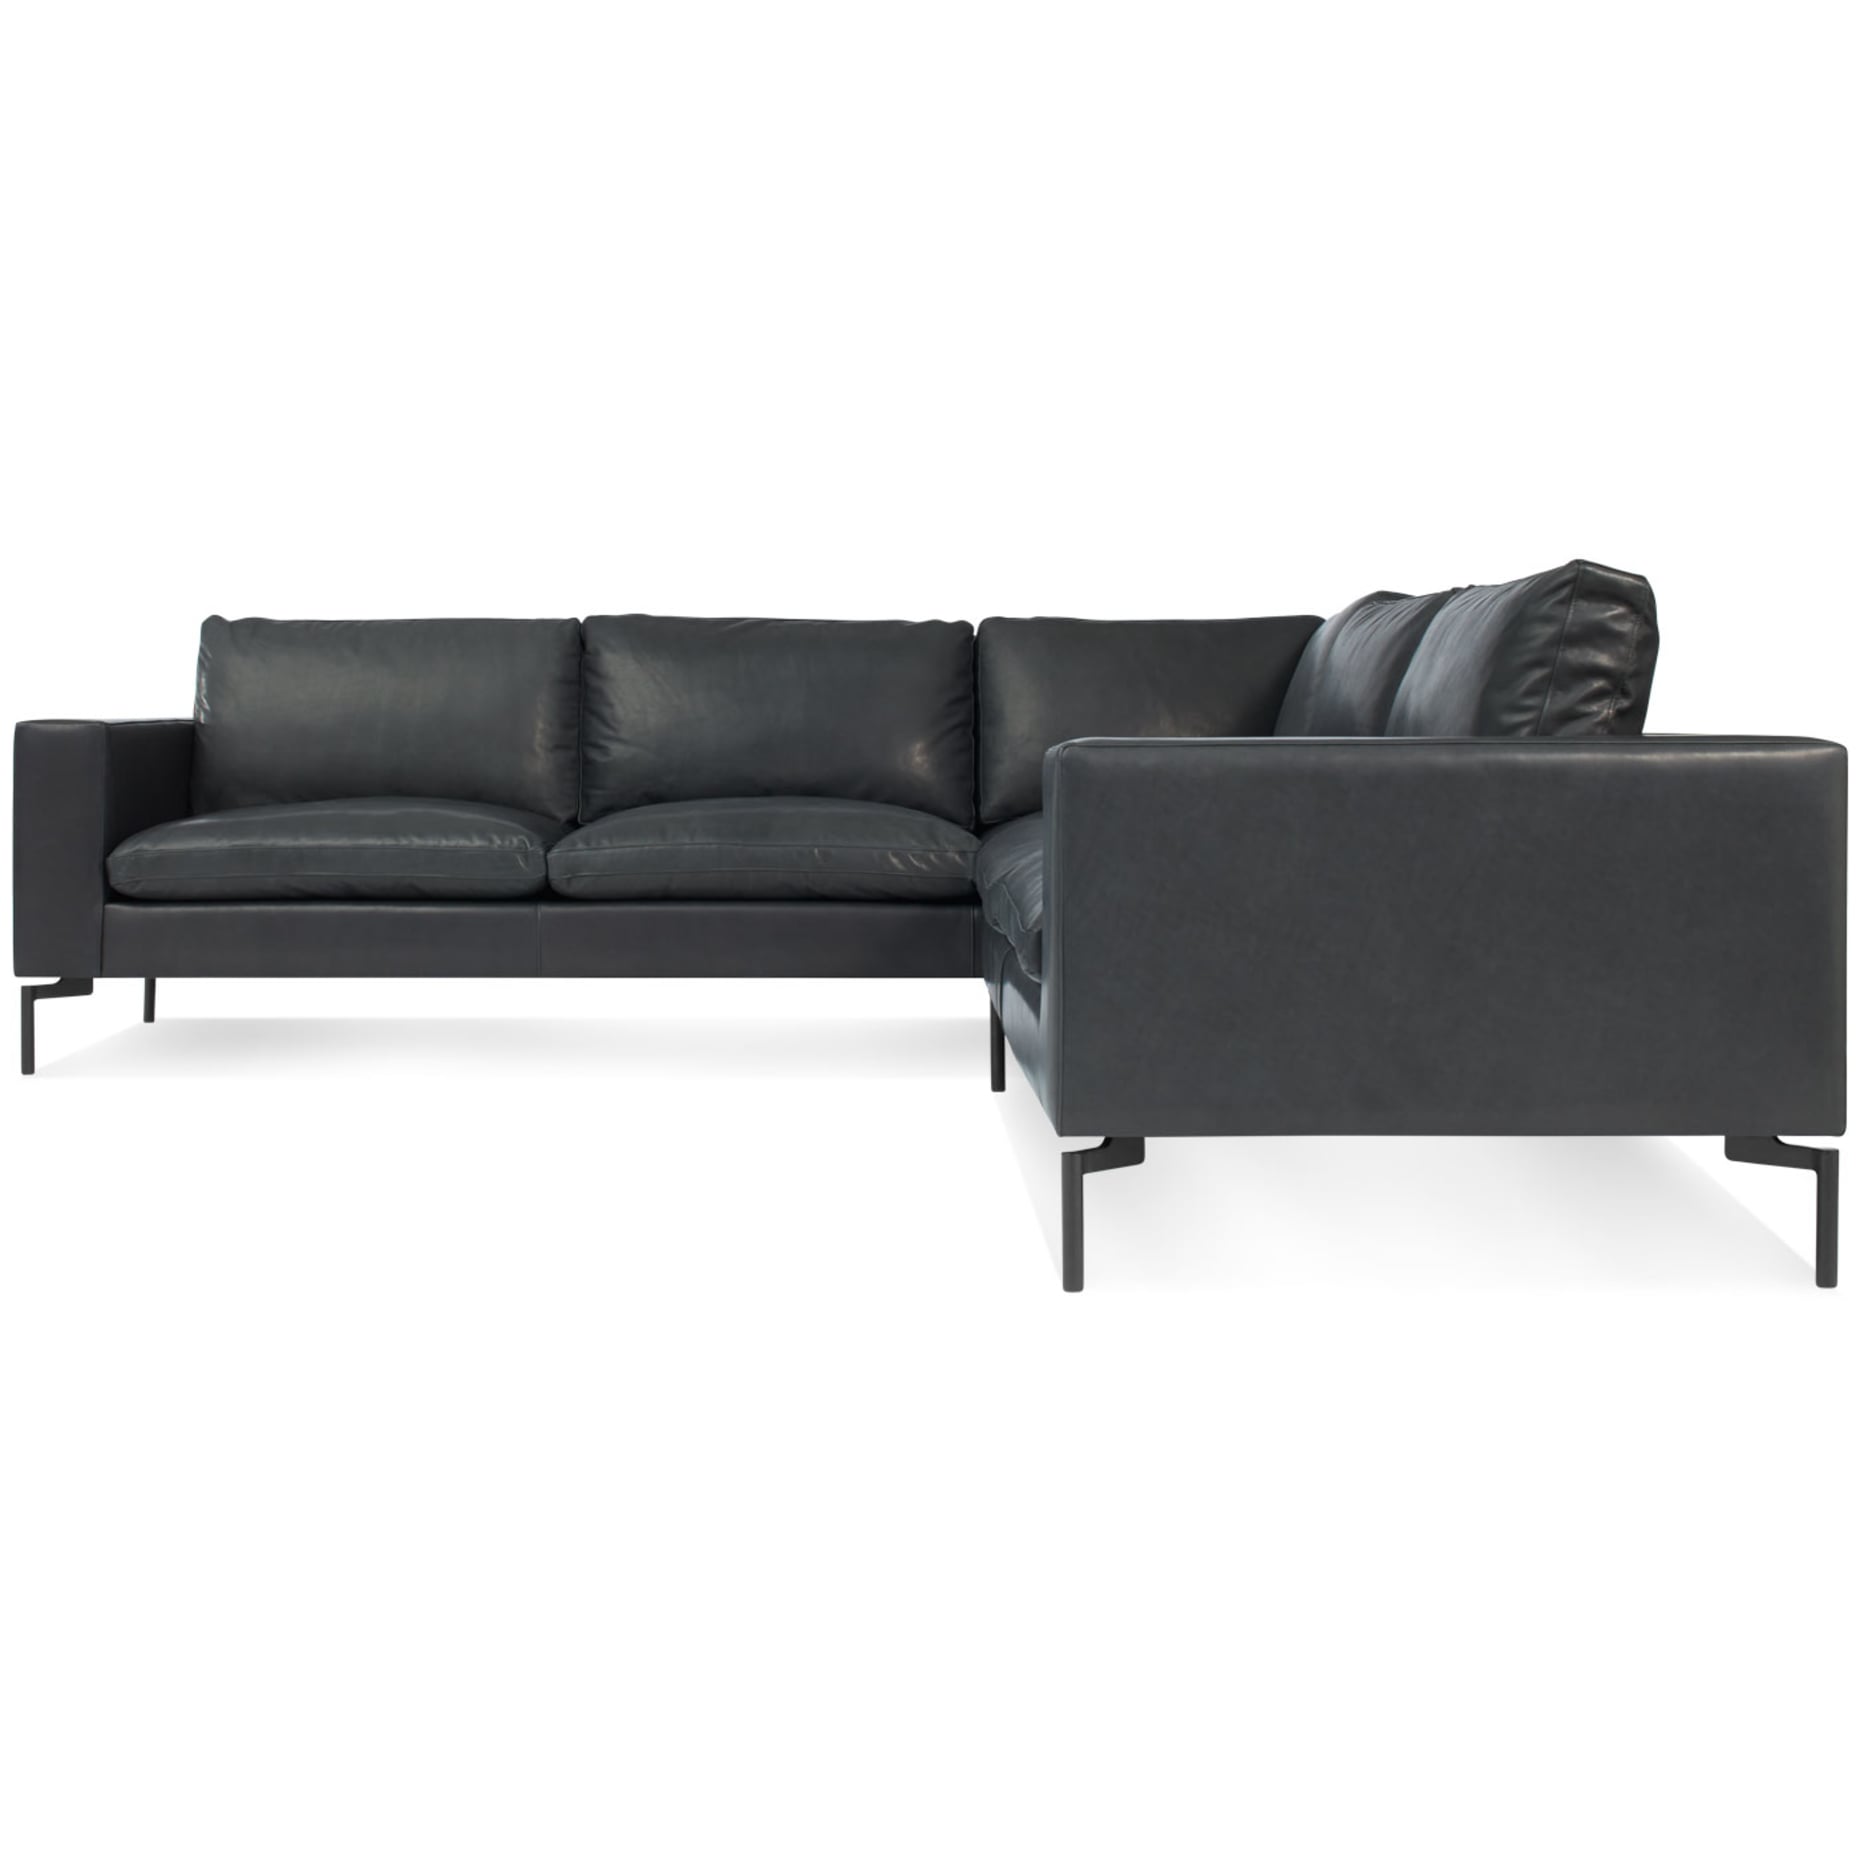 New Standard Leather Sectional Sofa, Leather Couch San Diego